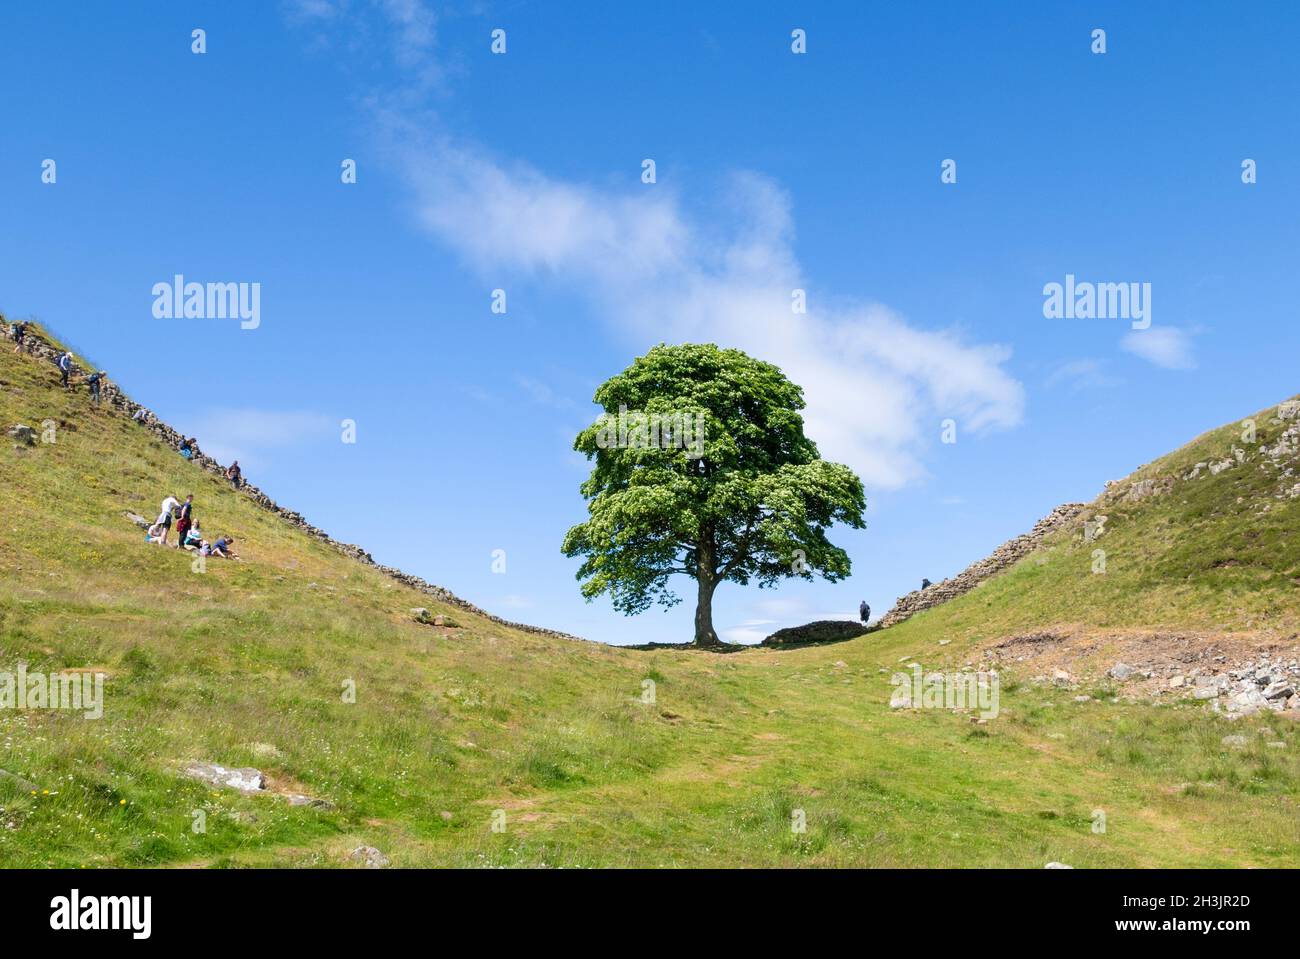 The Sycamore Gap Tree or Robin Hood Tree a sycamore tree standing next to Hadrian's Wall near Crag Lough in Northumberland England UK GB Stock Photo